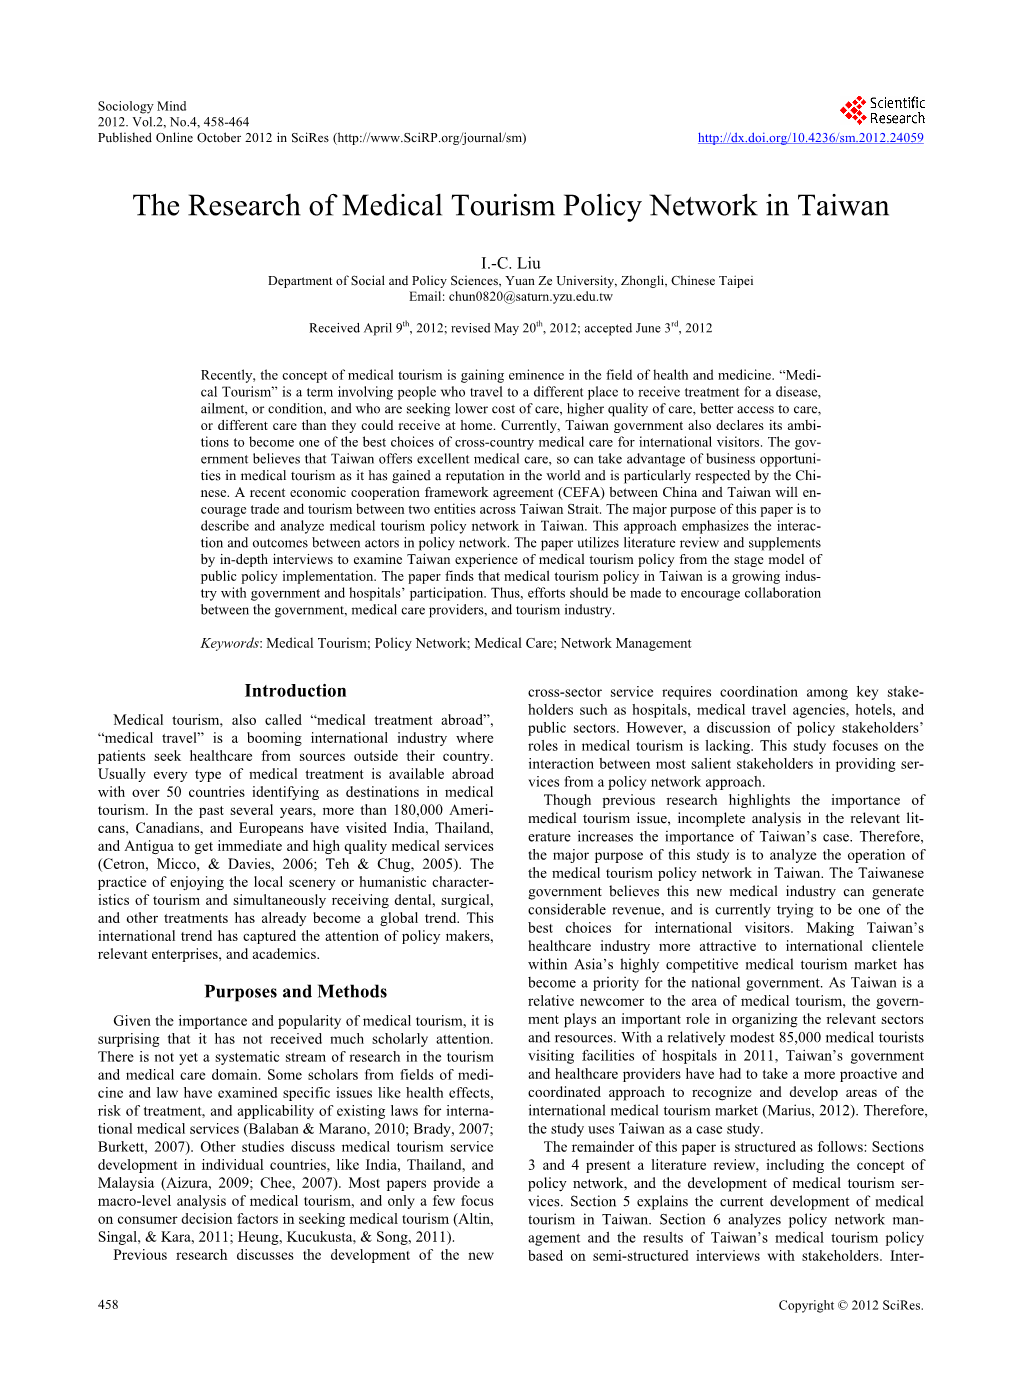 The Research of Medical Tourism Policy Network in Taiwan